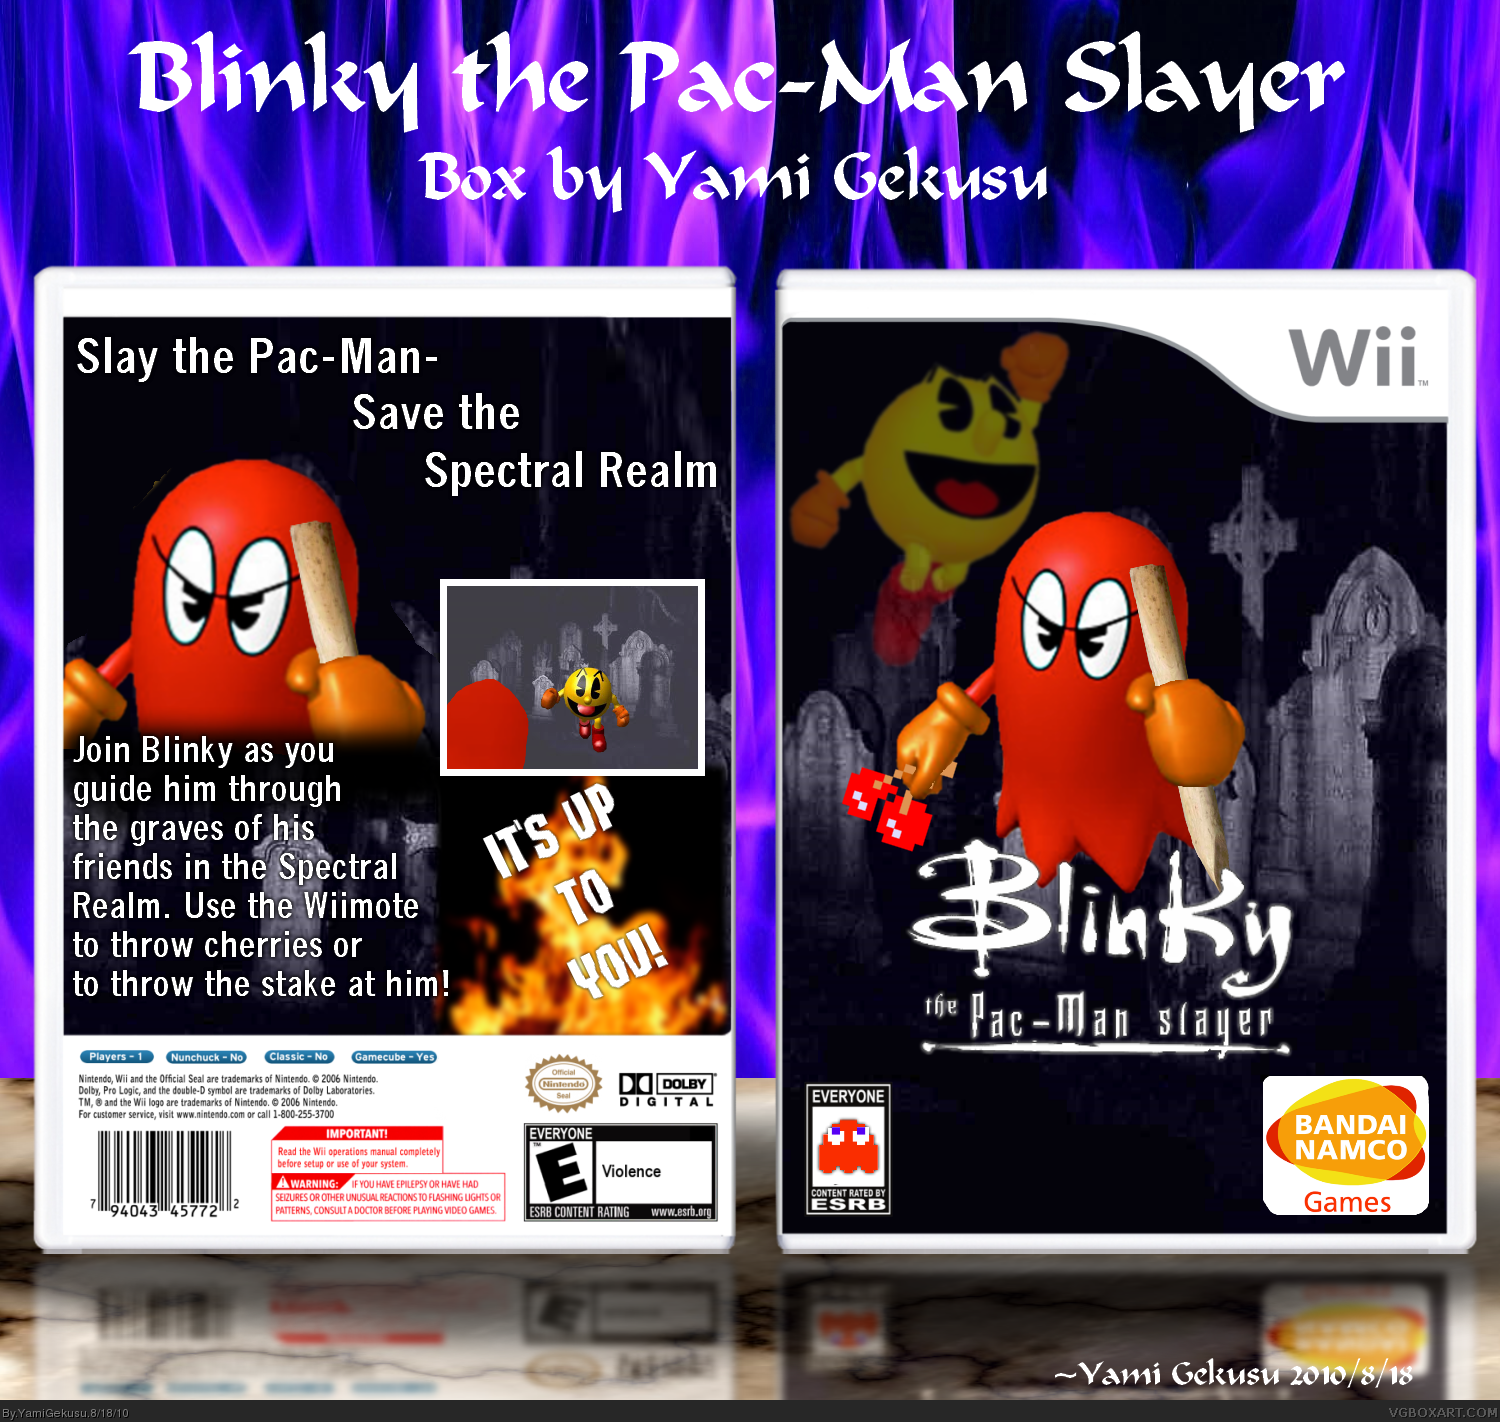 Blinky the Pac-Man Slayer box cover